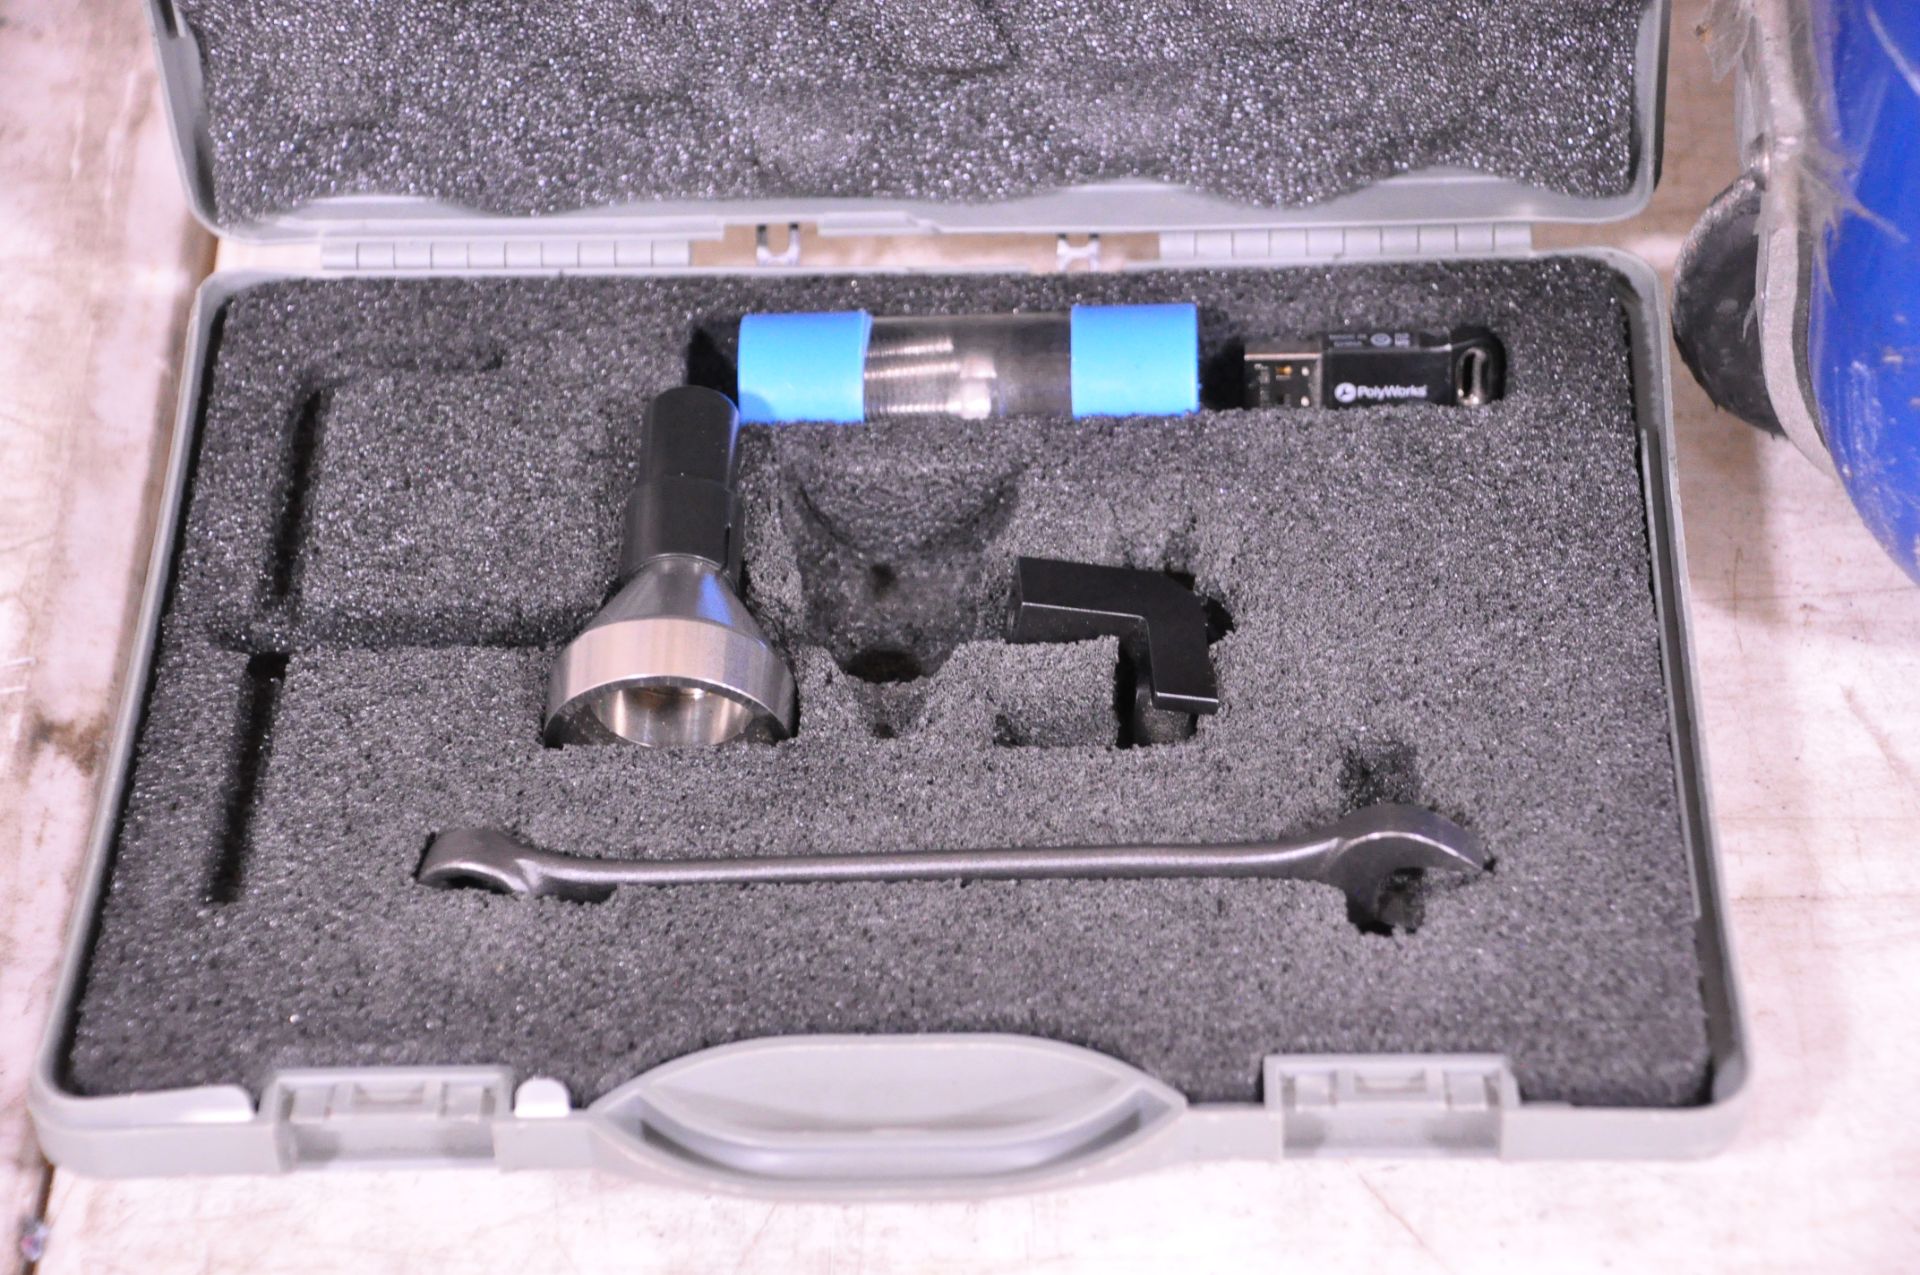 2009 Faro Platinum Articulating Coordinate Measuring Arm with Stylus, Tripod, Cables and Cases - Image 6 of 7